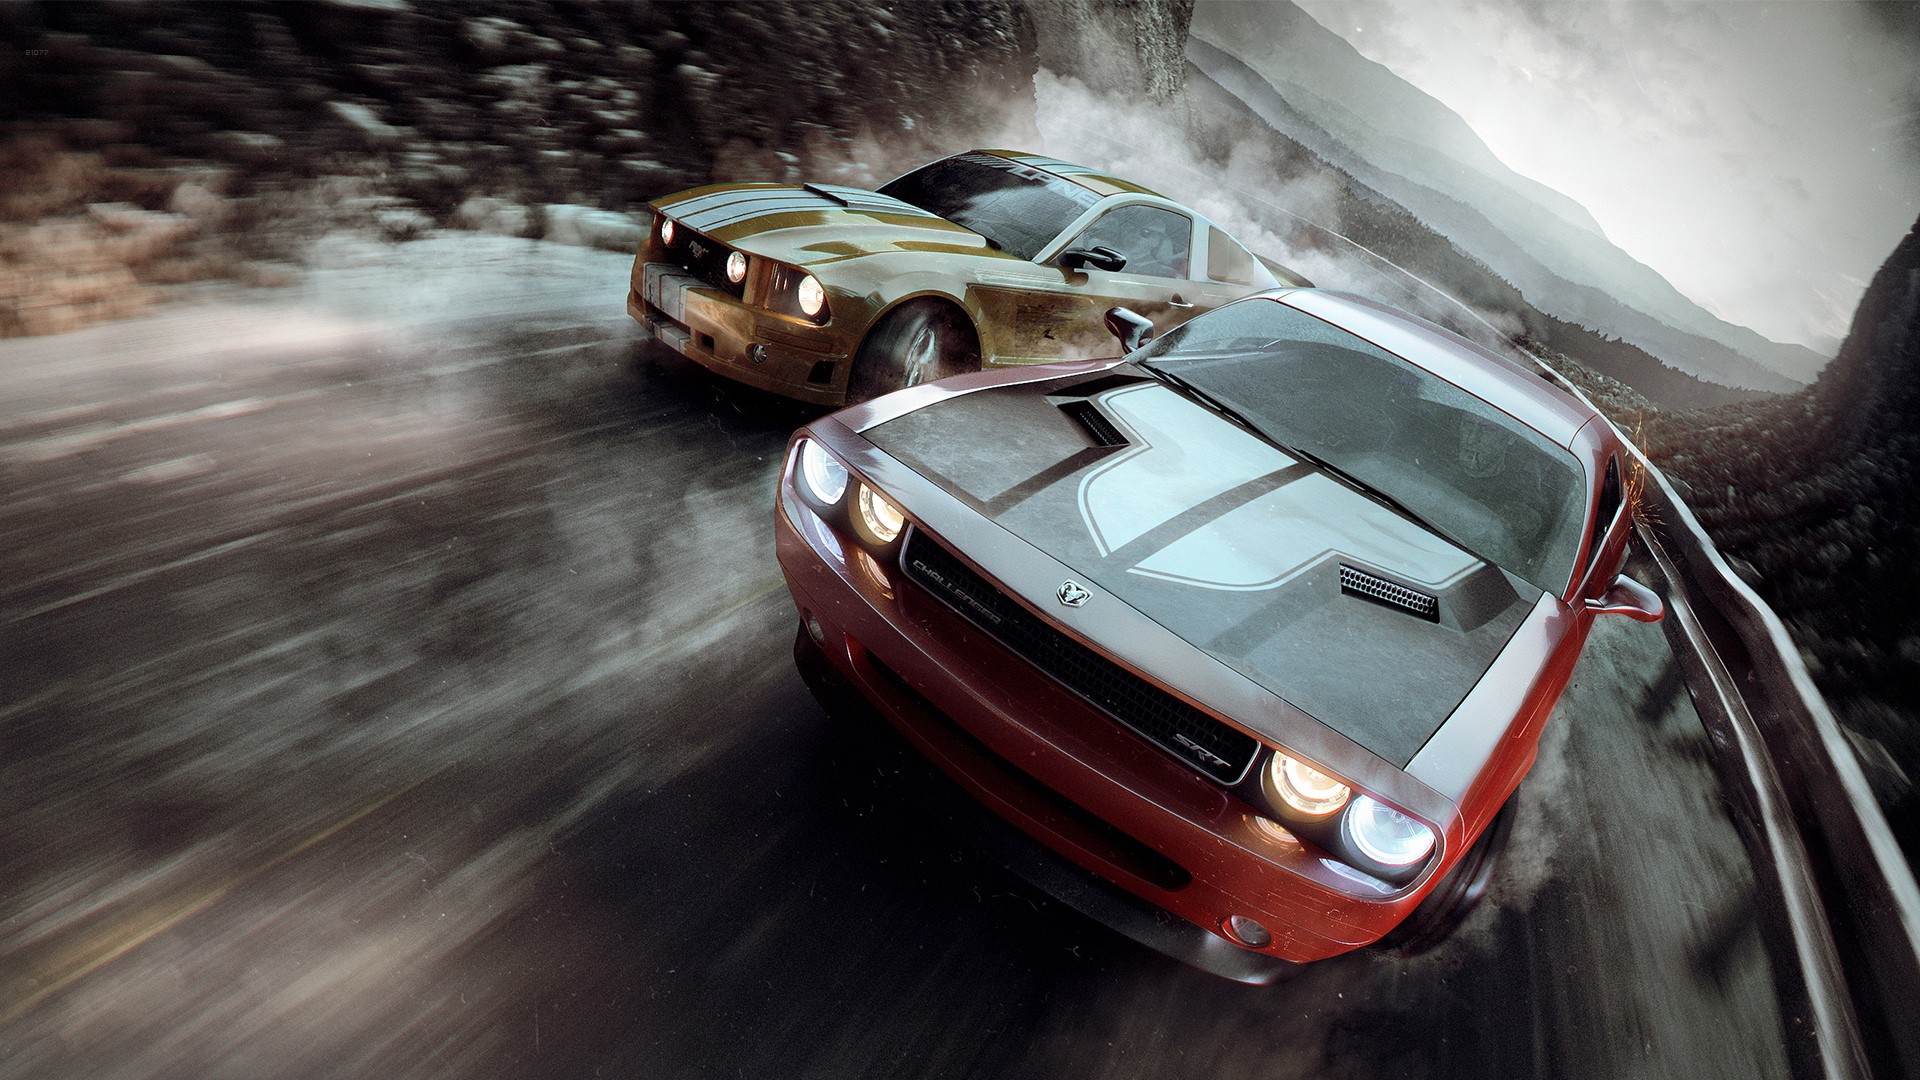 General 1920x1080 road Dodge Challenger Ford Mustang racing stripes dutch tilt racing car Ford Mustang S-197 Ford Dodge muscle cars American cars Stellantis